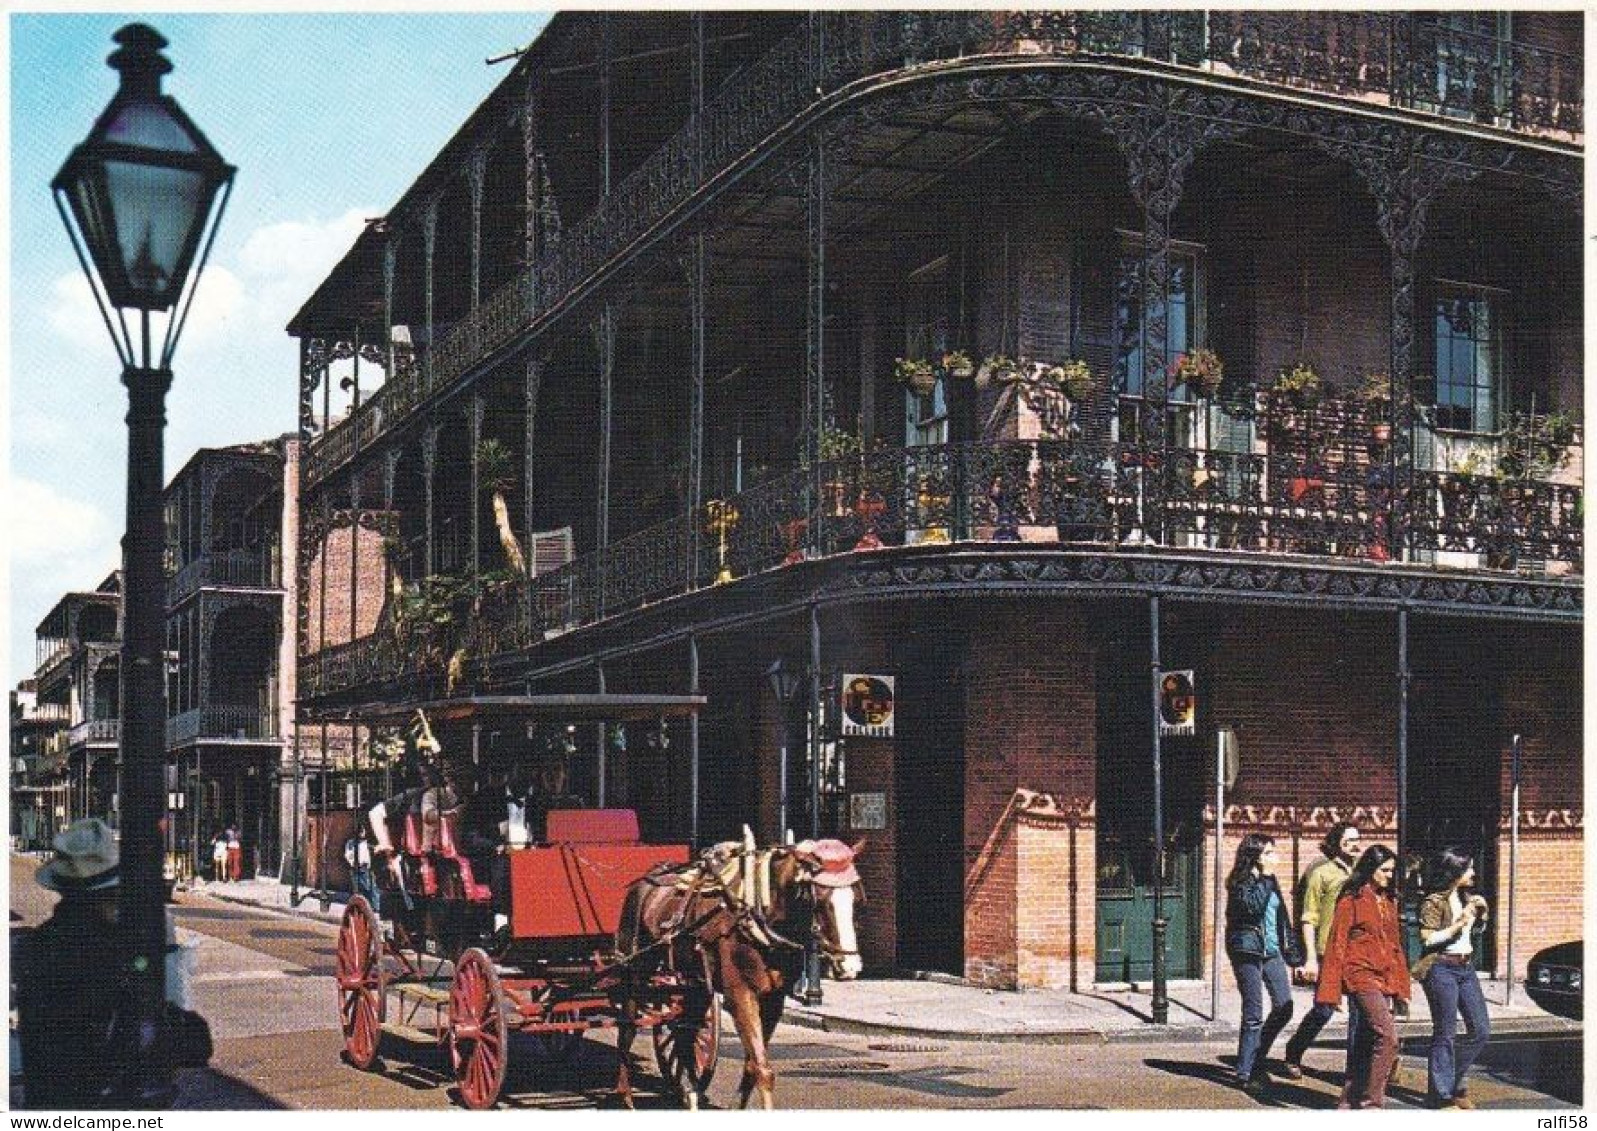 3 AK USA Louisiana * French Quarter In New Orleans - Lace Balconies St. Peter Street, Royal Street And Dumaine Street * - New Orleans